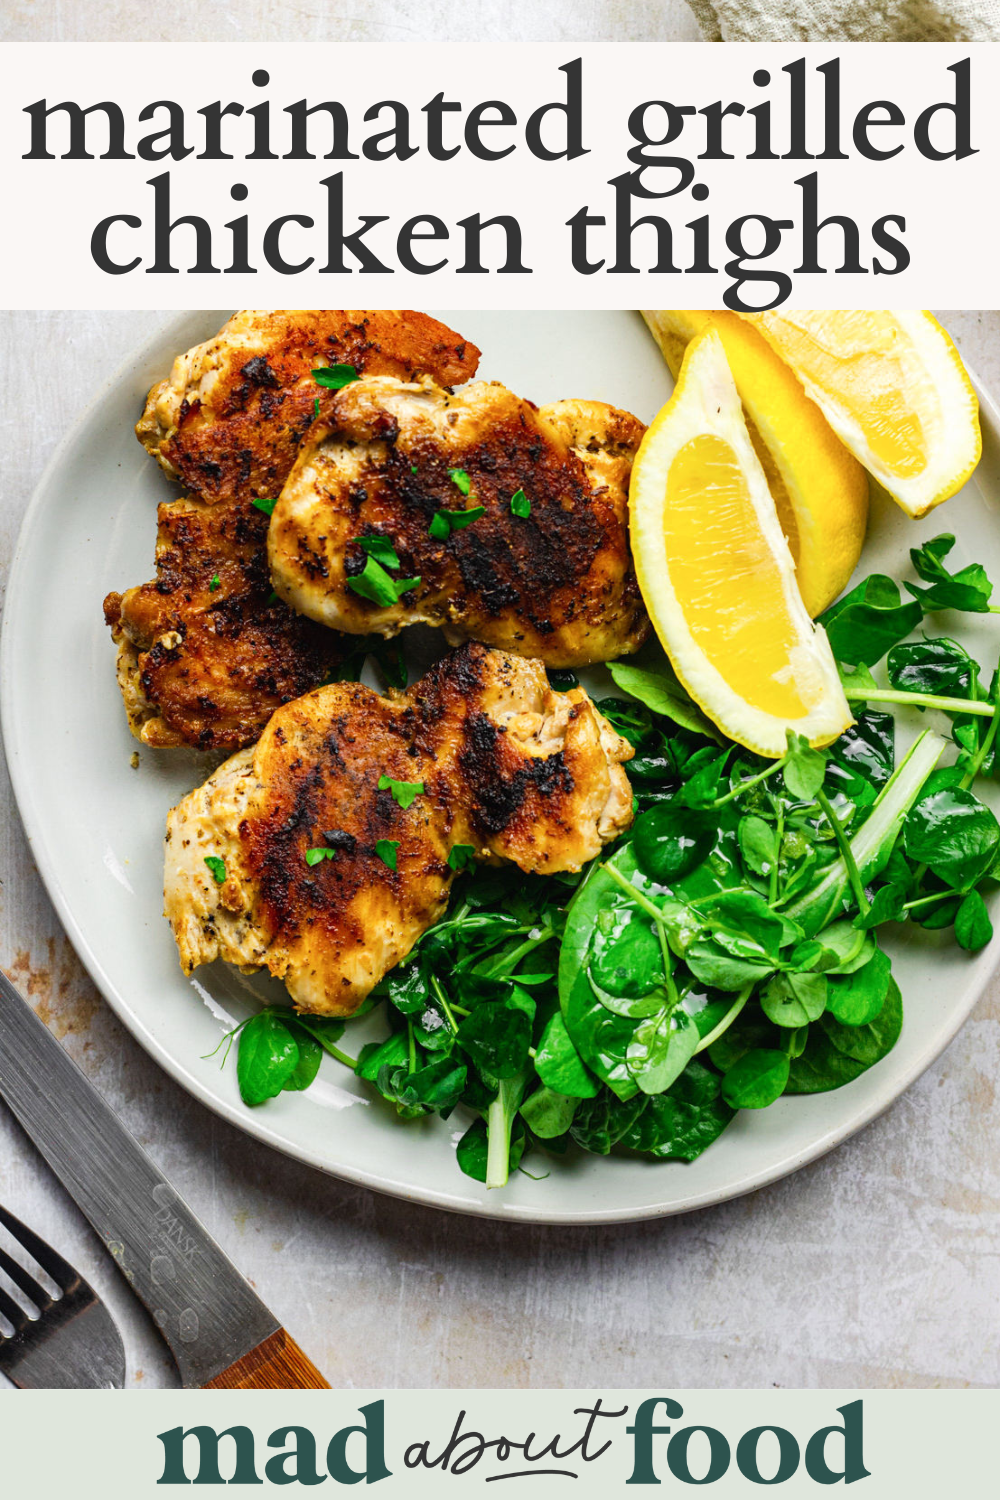 Image for pinning Marinated Grilled Chicken Thighs recipe on Pinterest